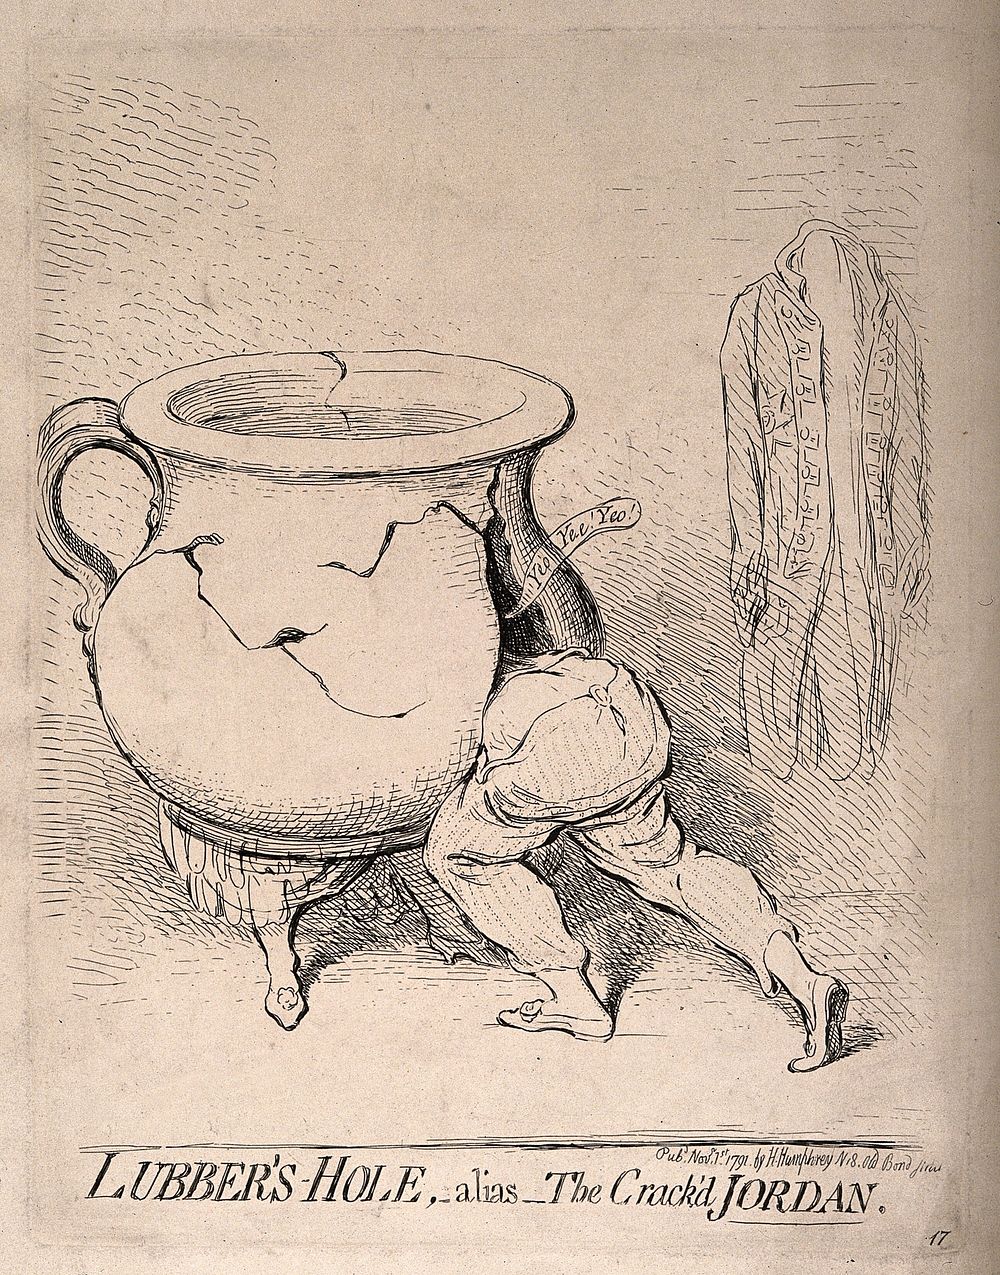 A man disappearing into a cracked chamber pot which has the legs of woman; implying the illicit relationship between the…